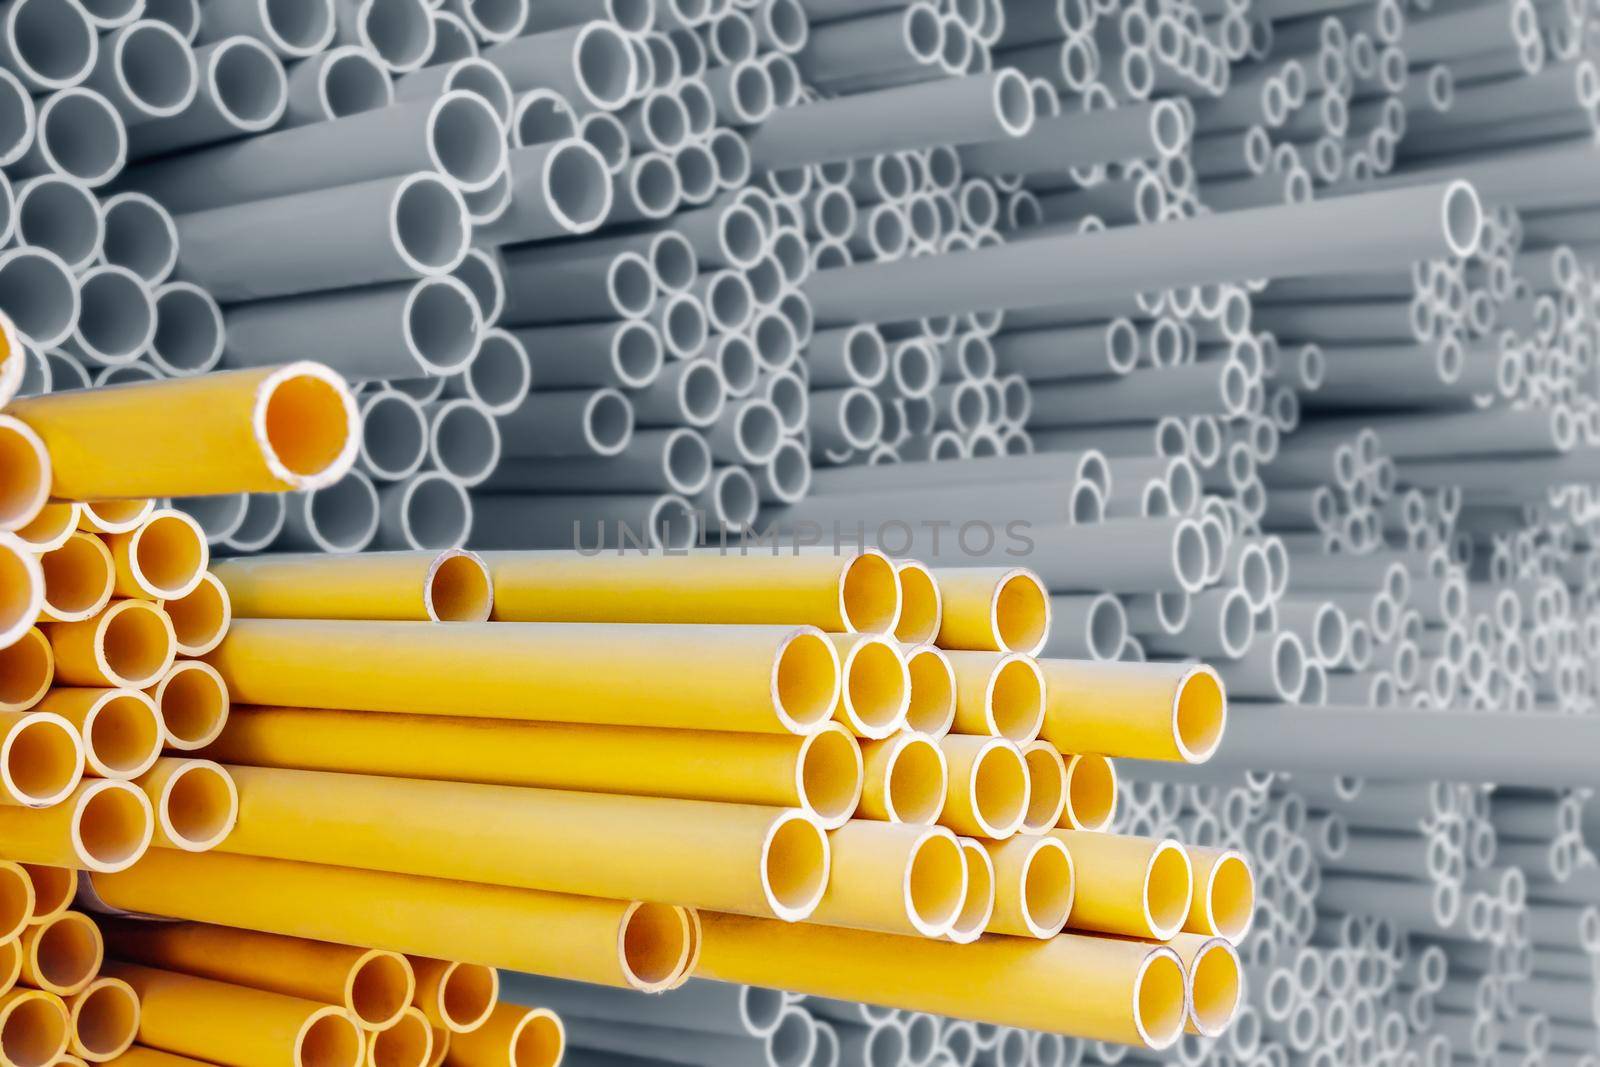 Yellow PVC pipes for electric conduit